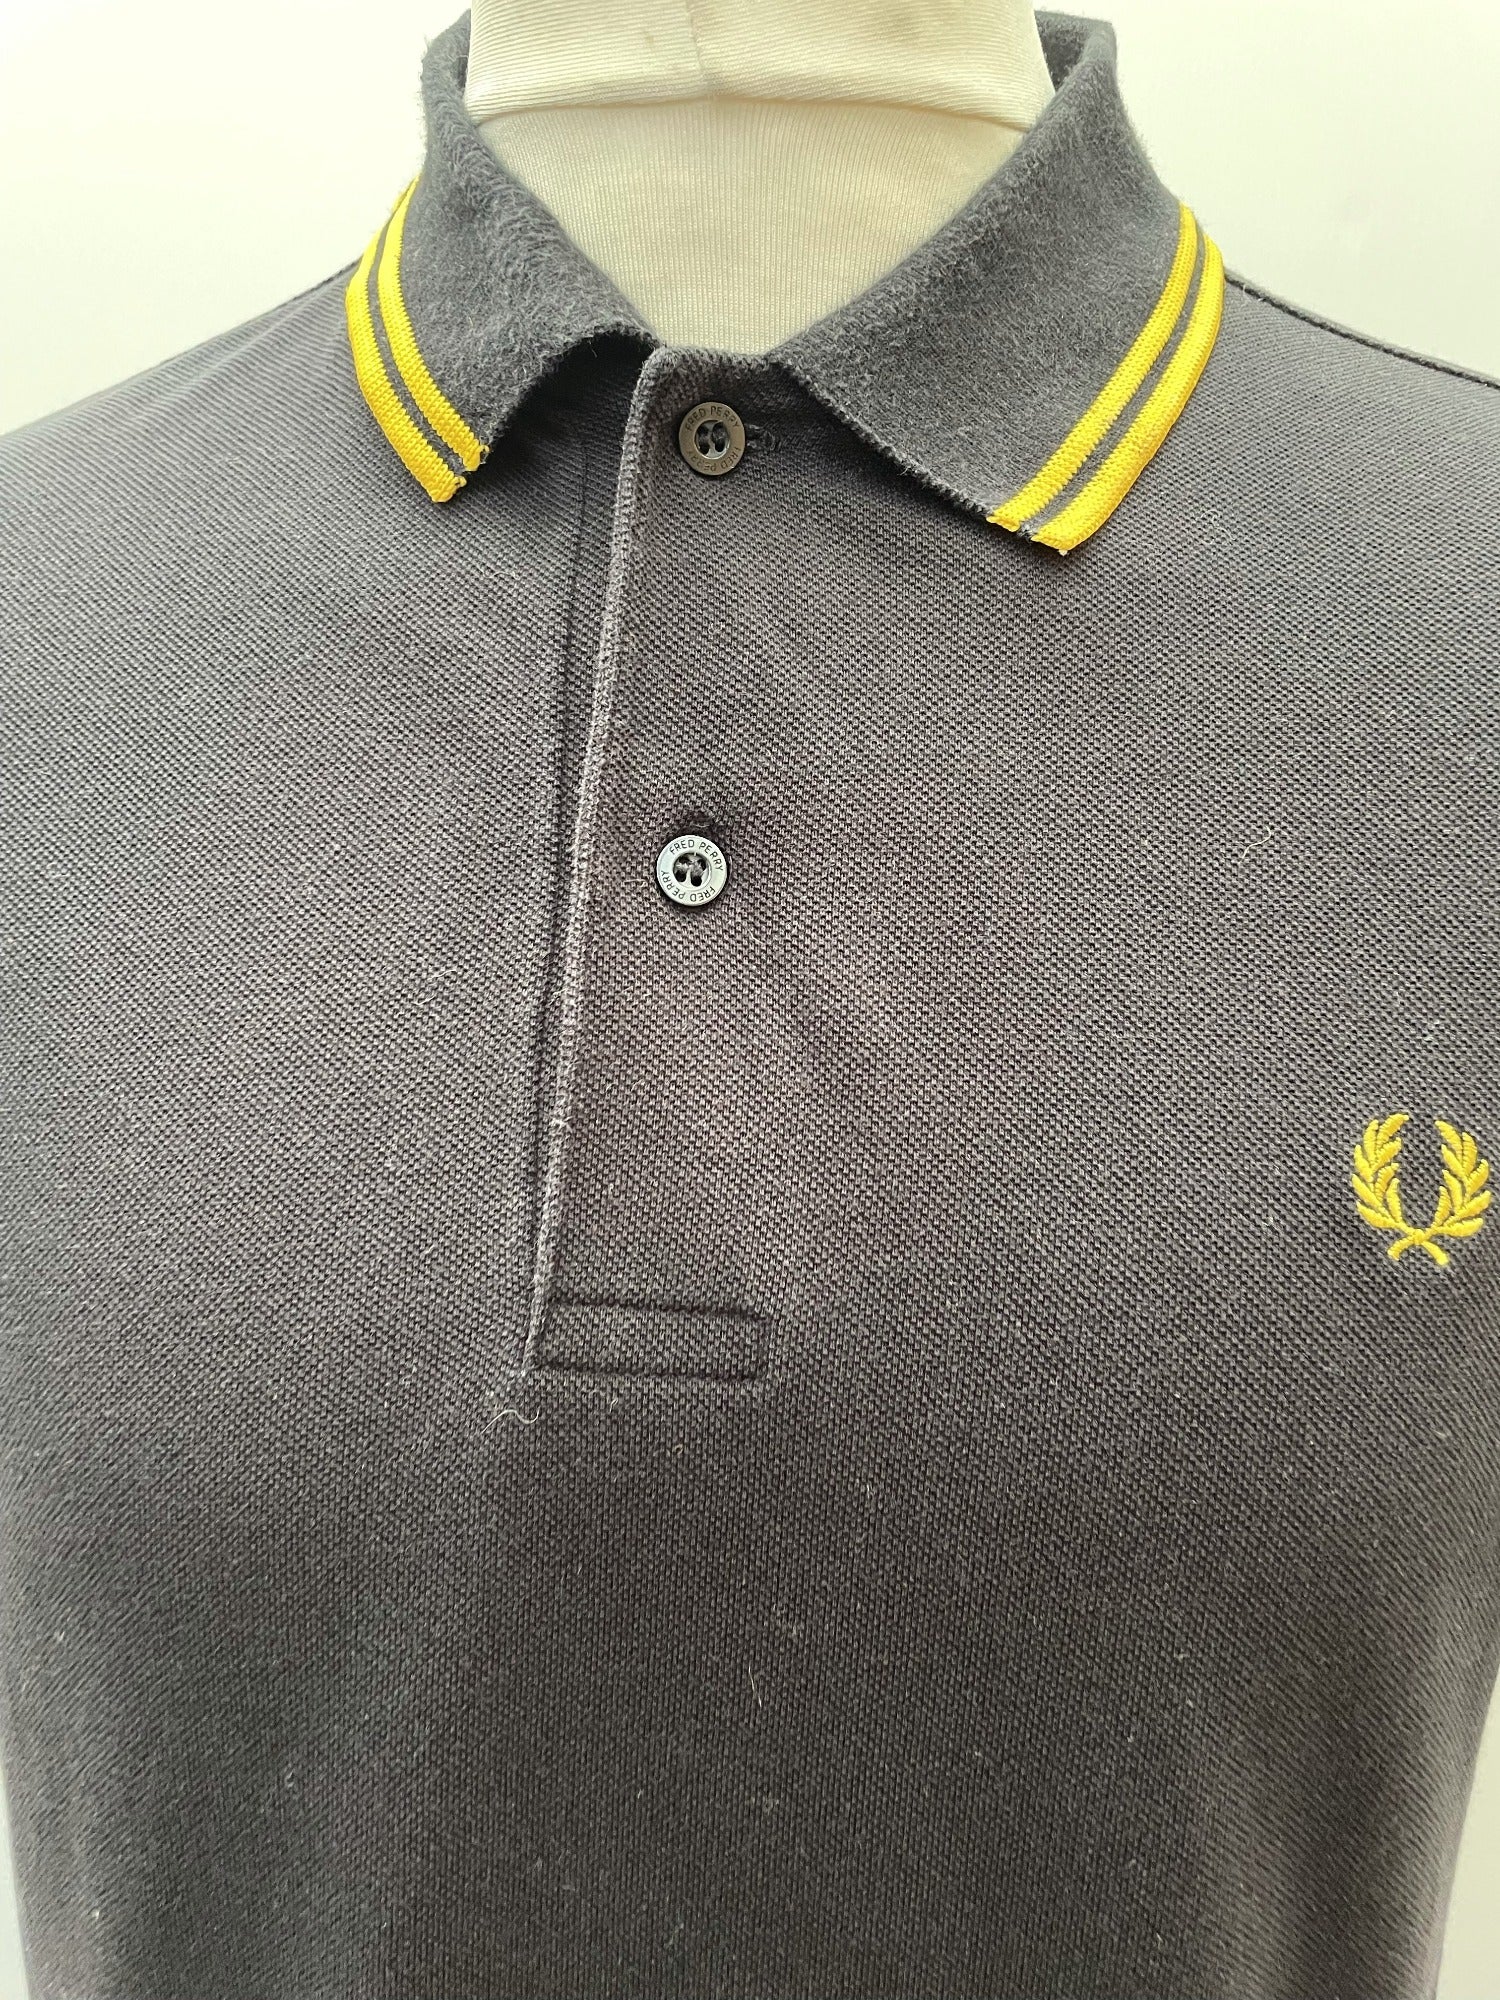 Yellow  vintage  urban village  tipped  stripey  Stripes  striped  stripe  sportswear  short sleeved  short sleeve  retro  polo top  polo  MOD  mens  L  Fred Perry  fred  collared  collar  button  black  Online store